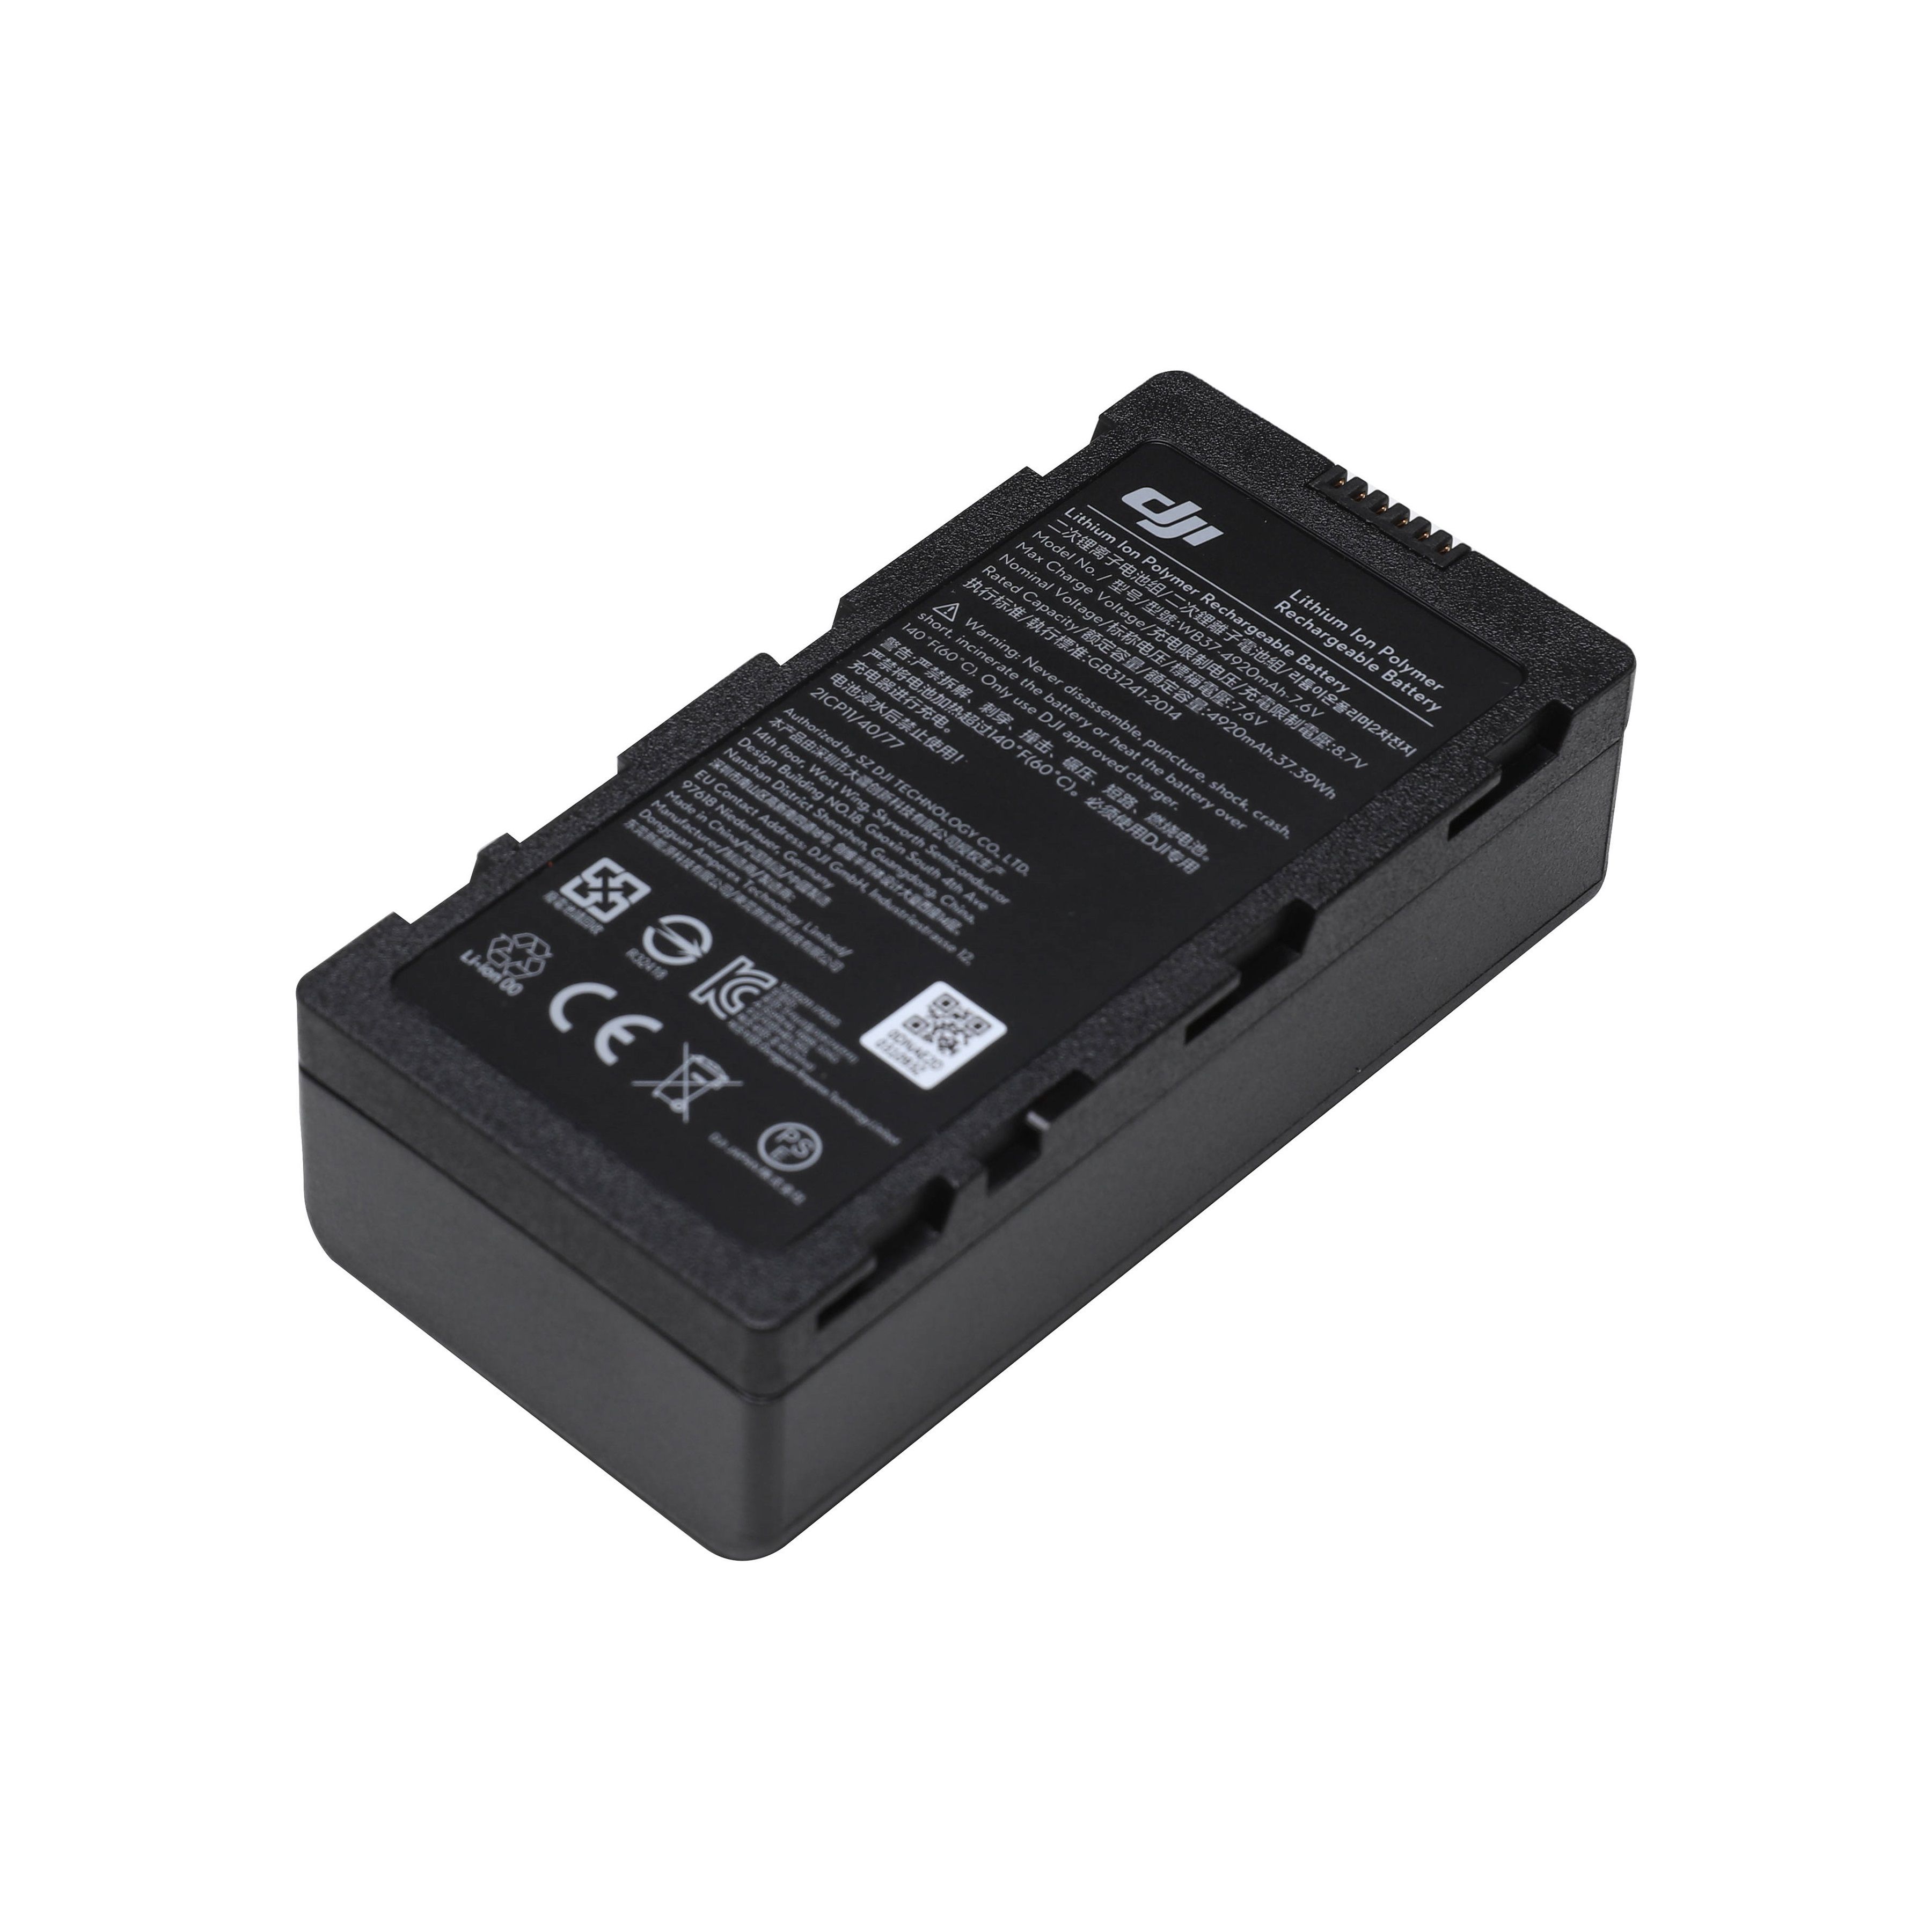 DJI WB37 Battery for Cendence / CrystalSky / M300 Smart Controller